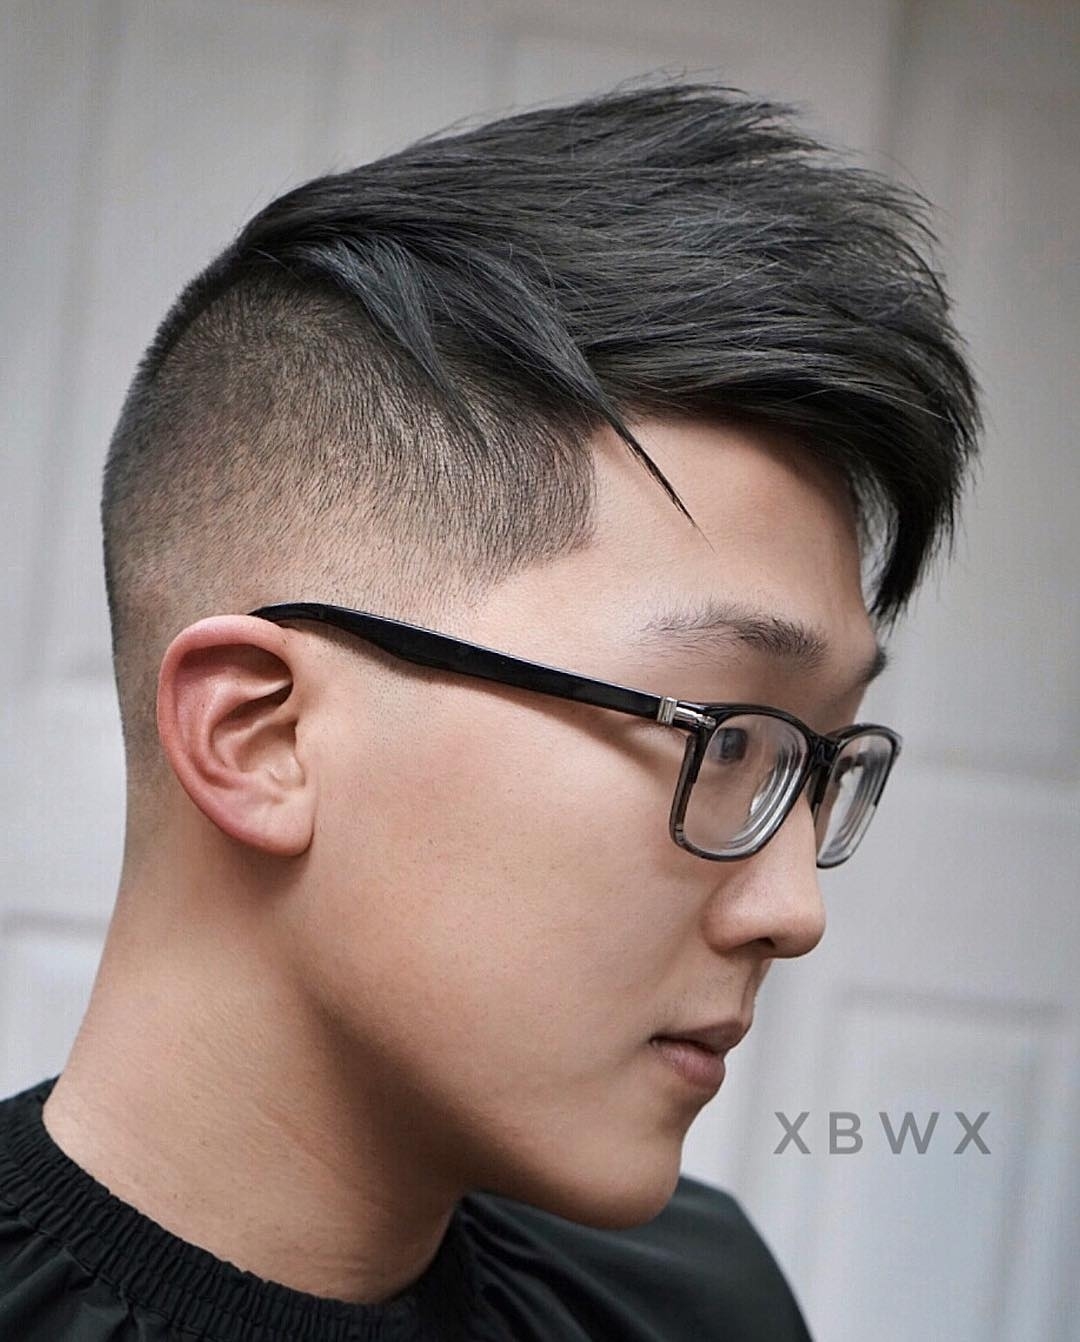 Best Hairstyles For Asian Men intended for Best Cool Hairstyles For Asian Guys